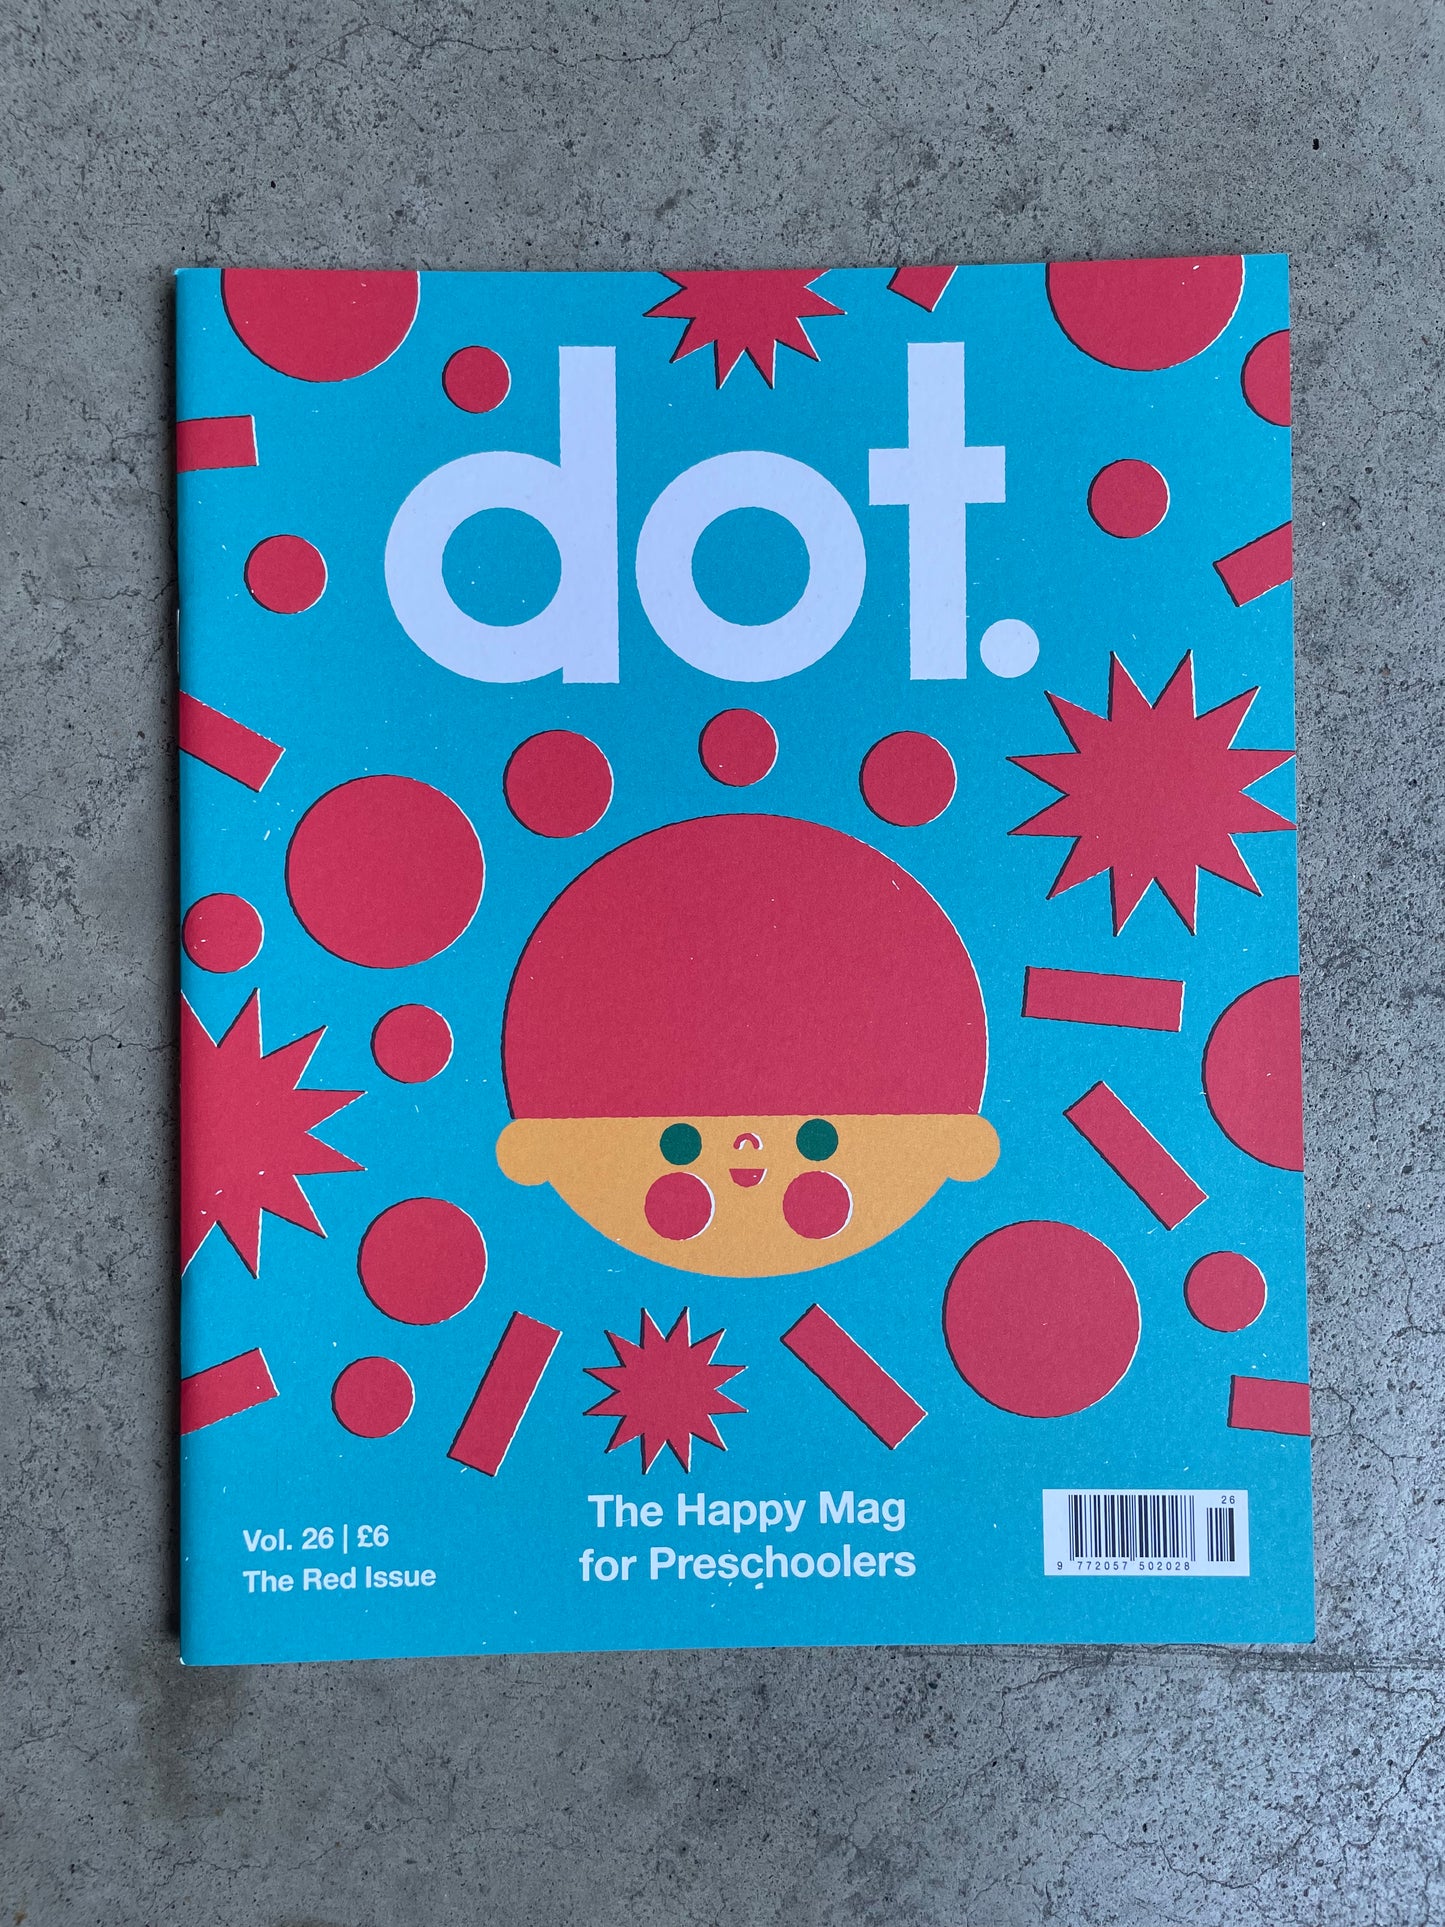 Dot - Red Issue - Vol 26